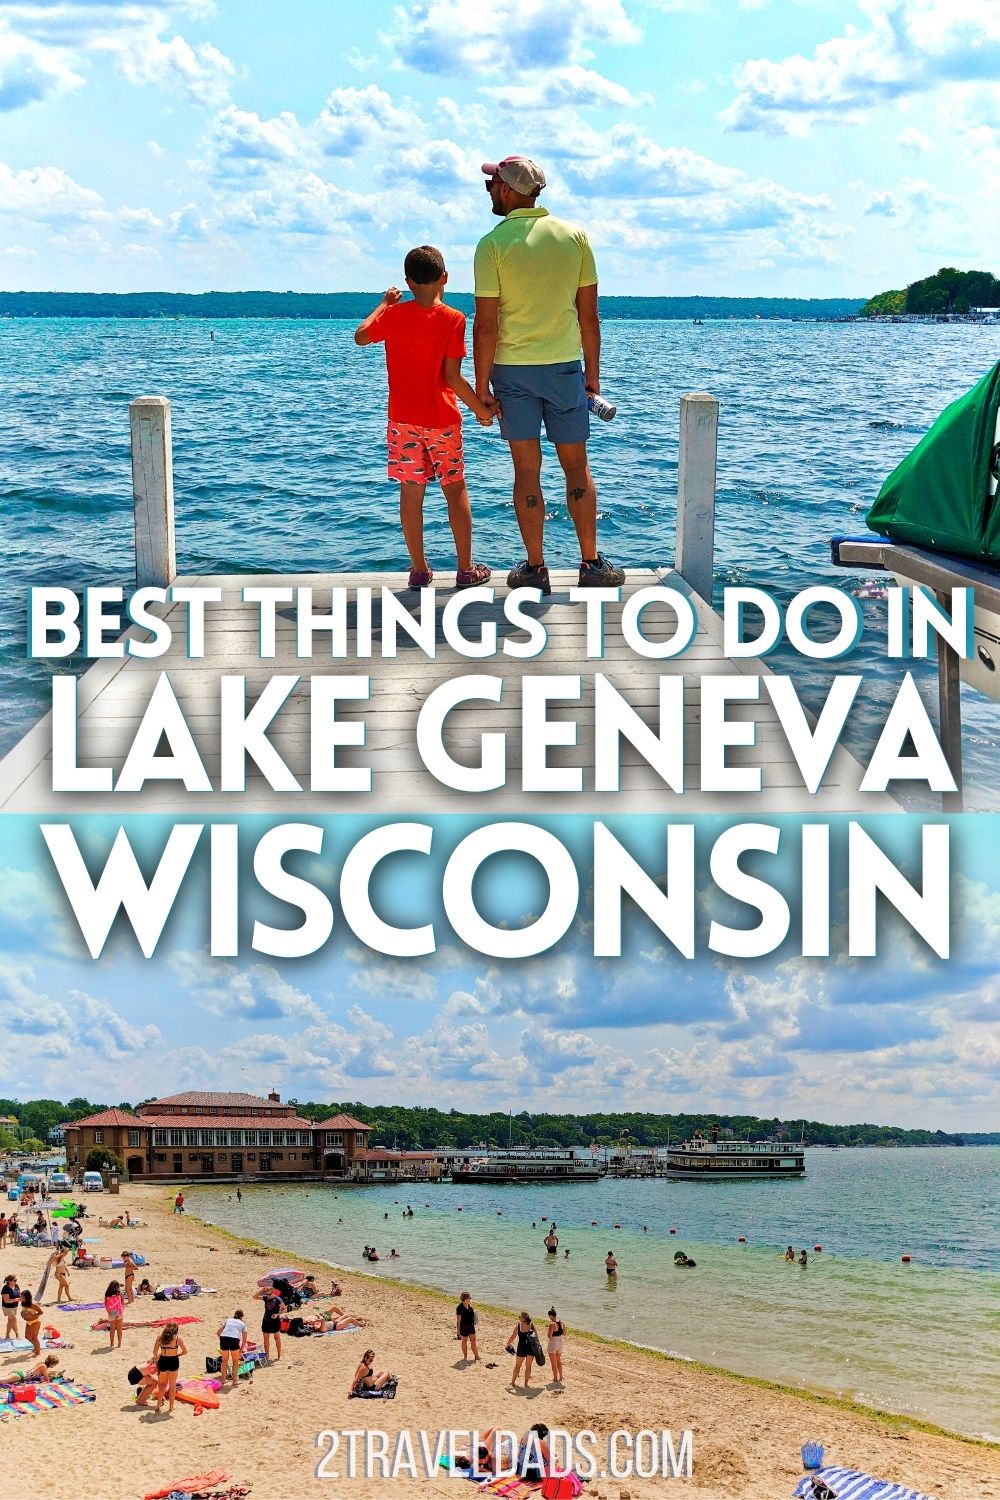 Lake Geneva is THE summer destination in Wisconsin with so many things to do both on the lake and around farm country. Check out the best of this bygone era Midwest playground, including how to explore the famous Lake Geneva Shore Path.